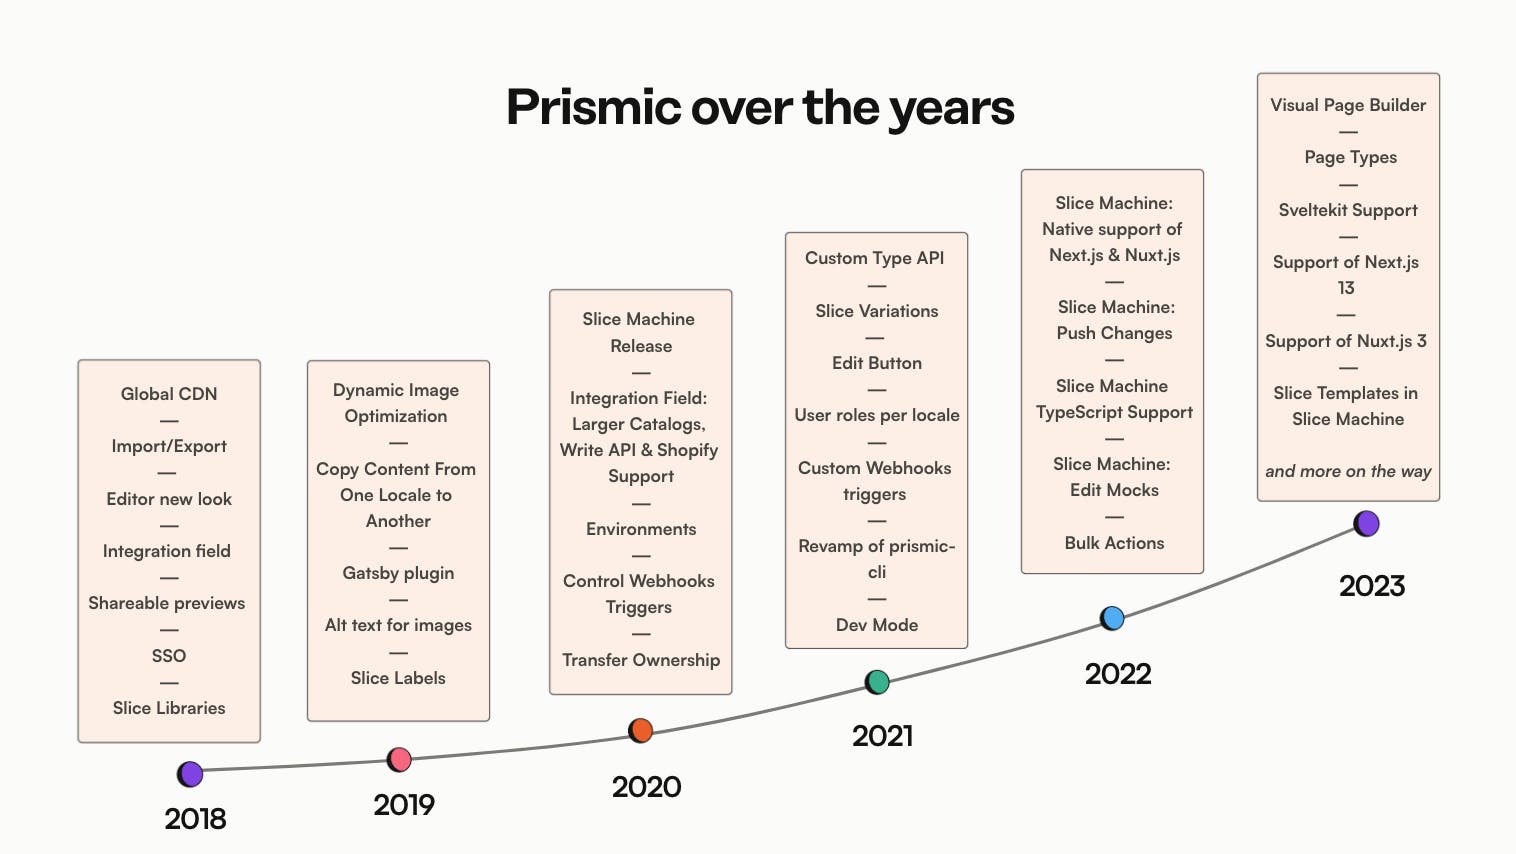 An image of Prismic's product changes over the past six years.